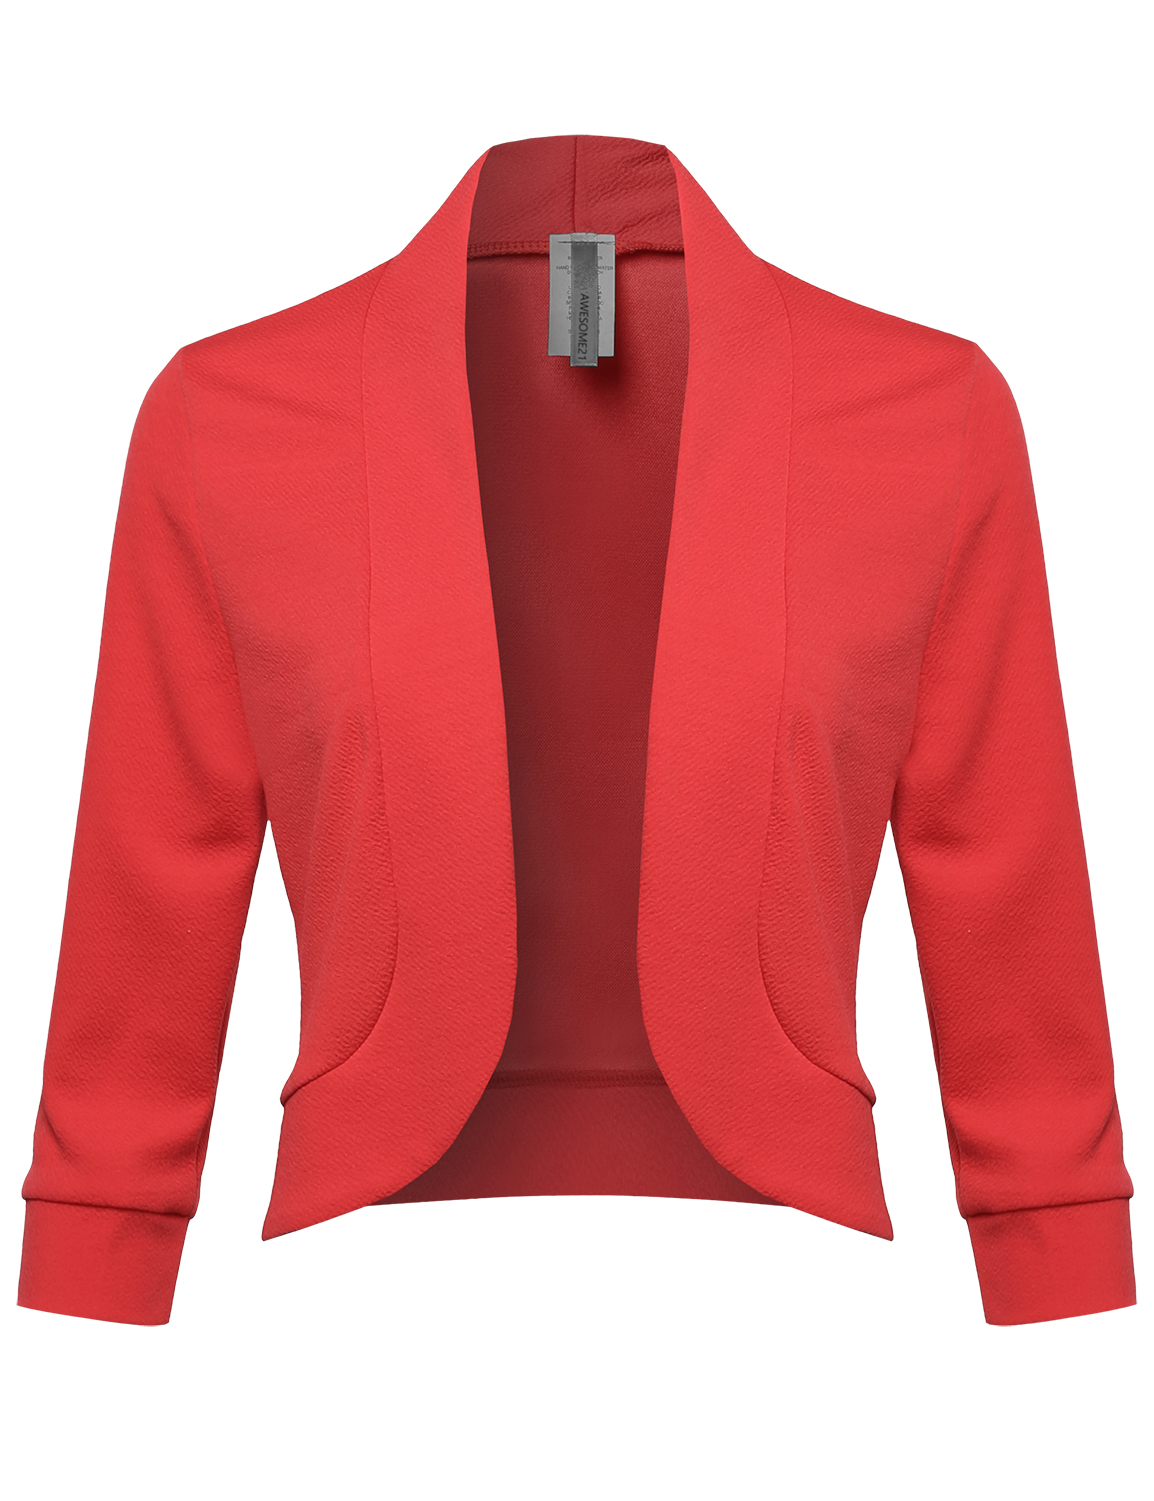 FashionOutfit Women's Solid 3/4 Sleeves Open Front Bolero Blazer - Made ...